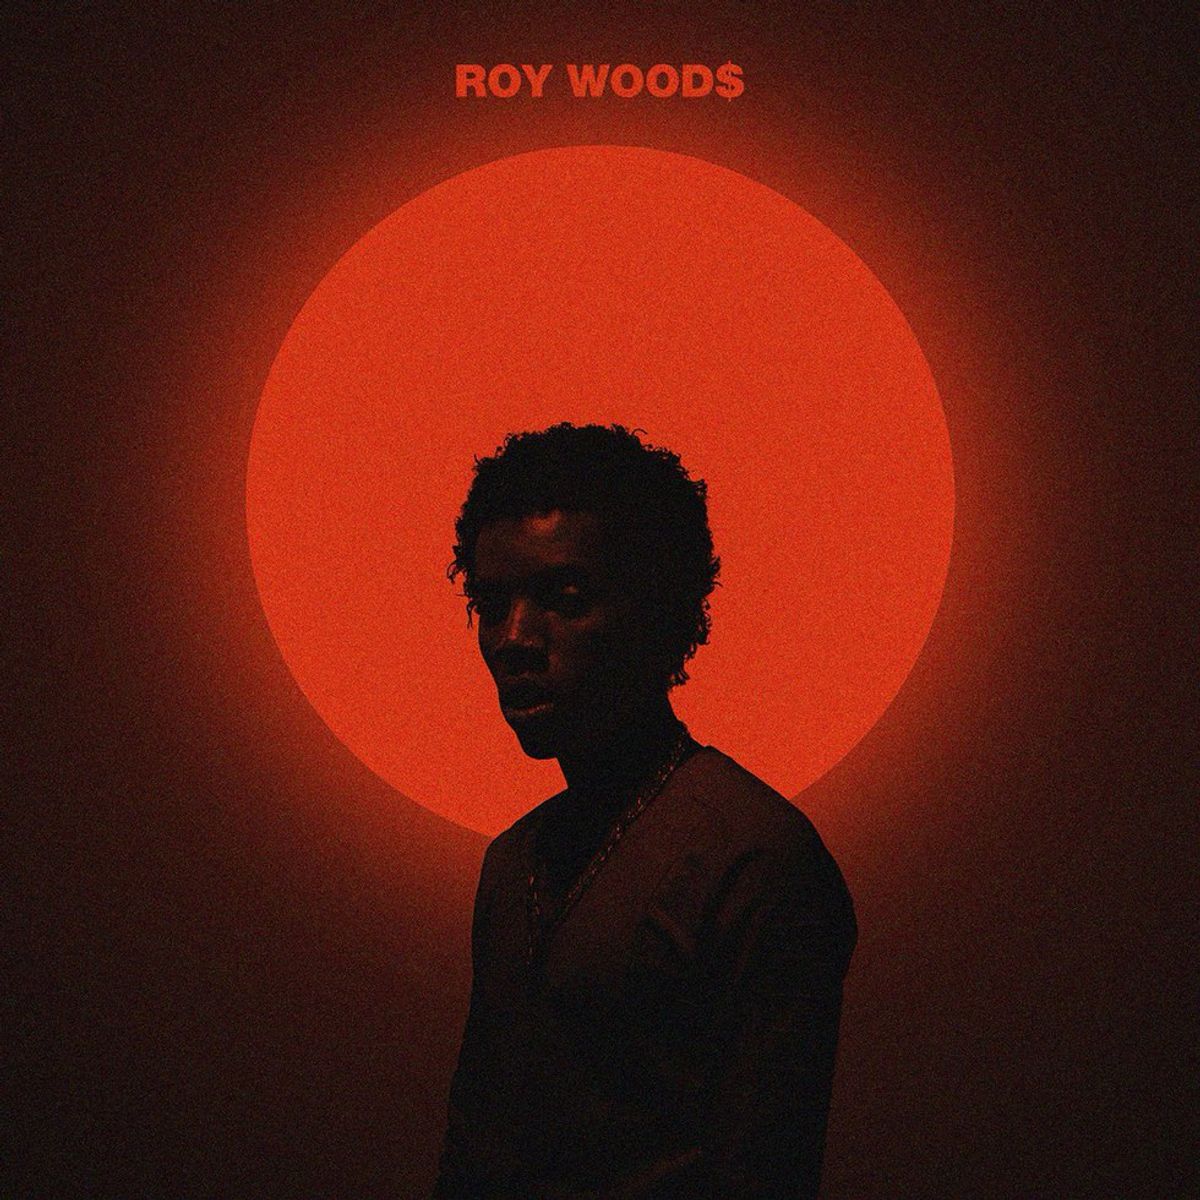 Roy Wood$ Finally Releases His Album "Waking at Dawn"